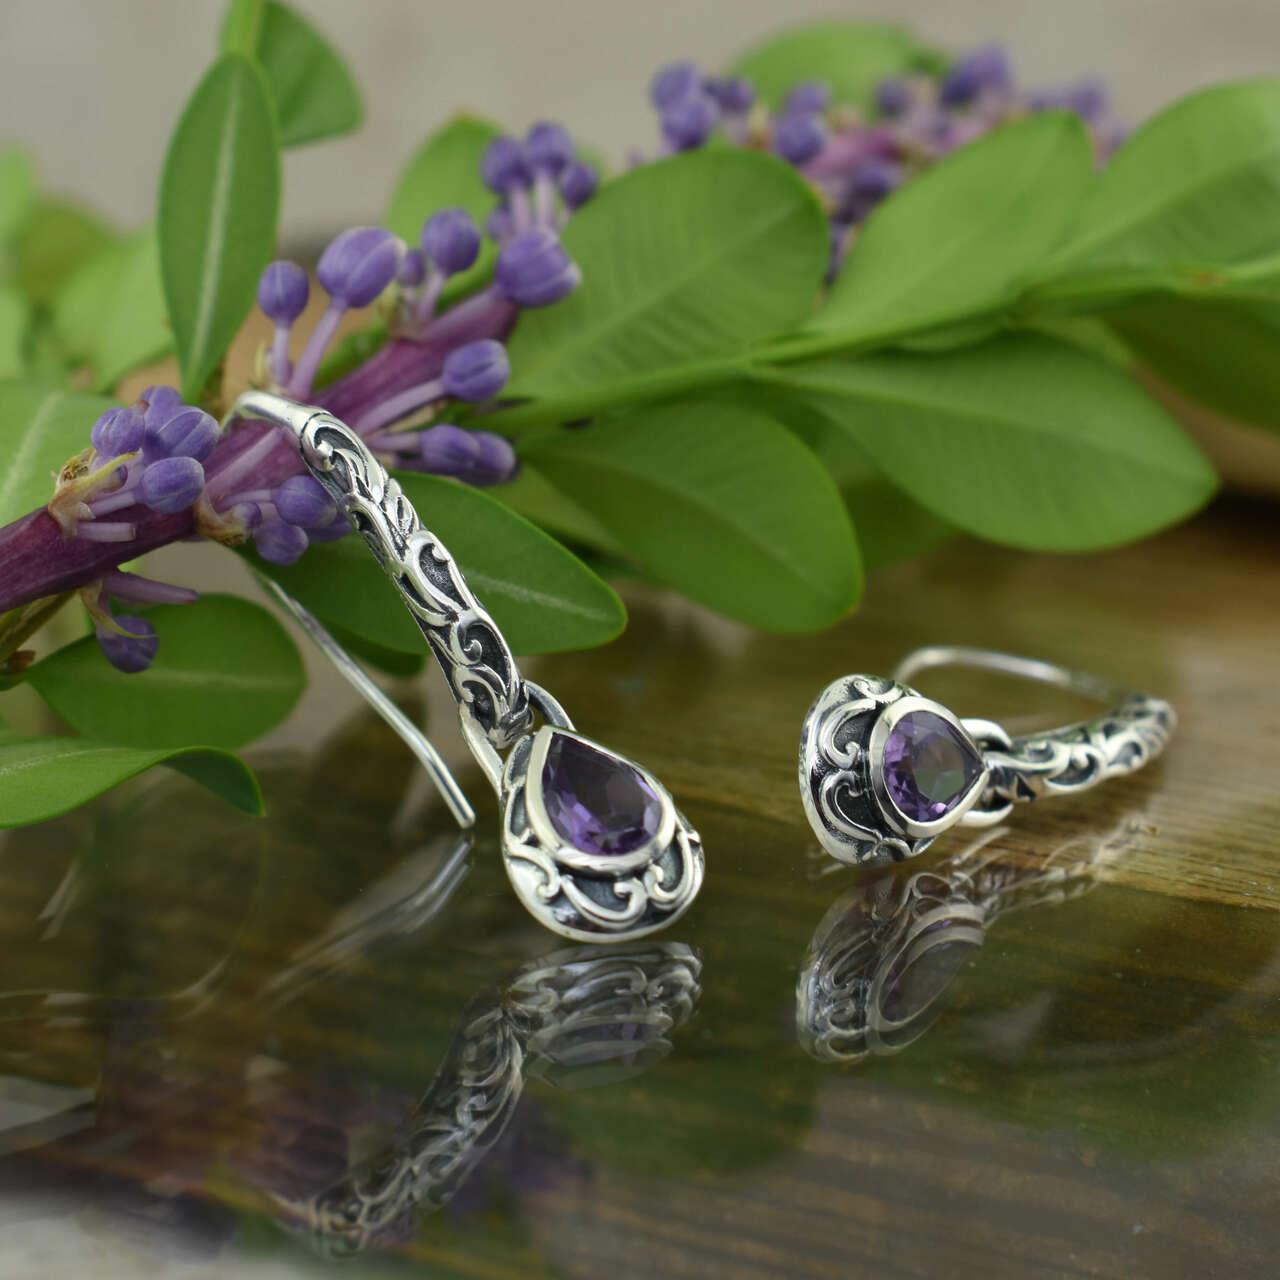 .925 sterling silver earrings with center African Amethyst stone